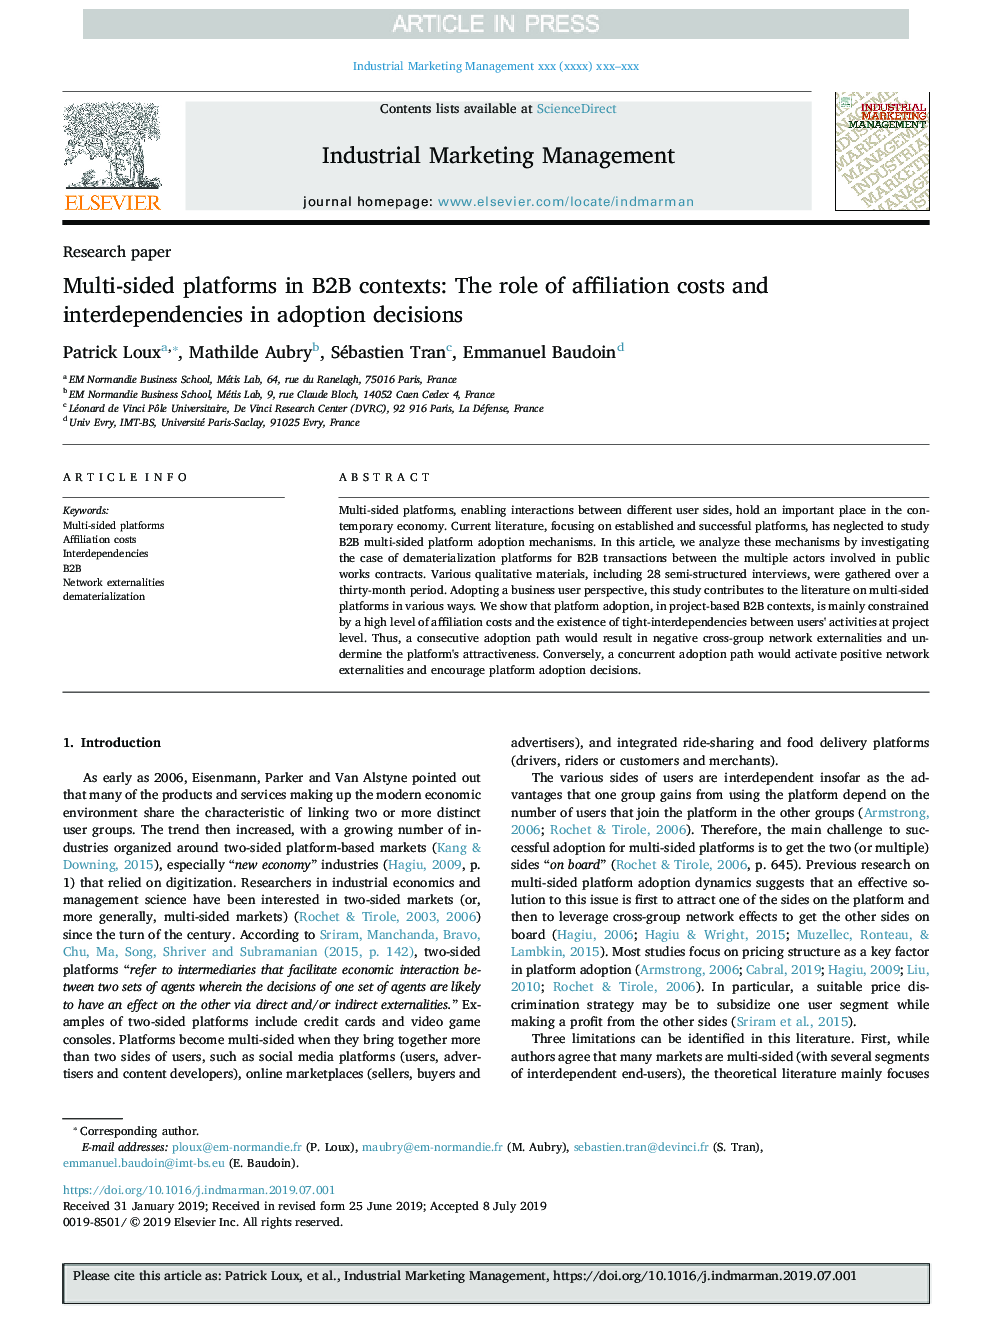 Multi-sided platforms in B2B contexts: The role of affiliation costs and interdependencies in adoption decisions